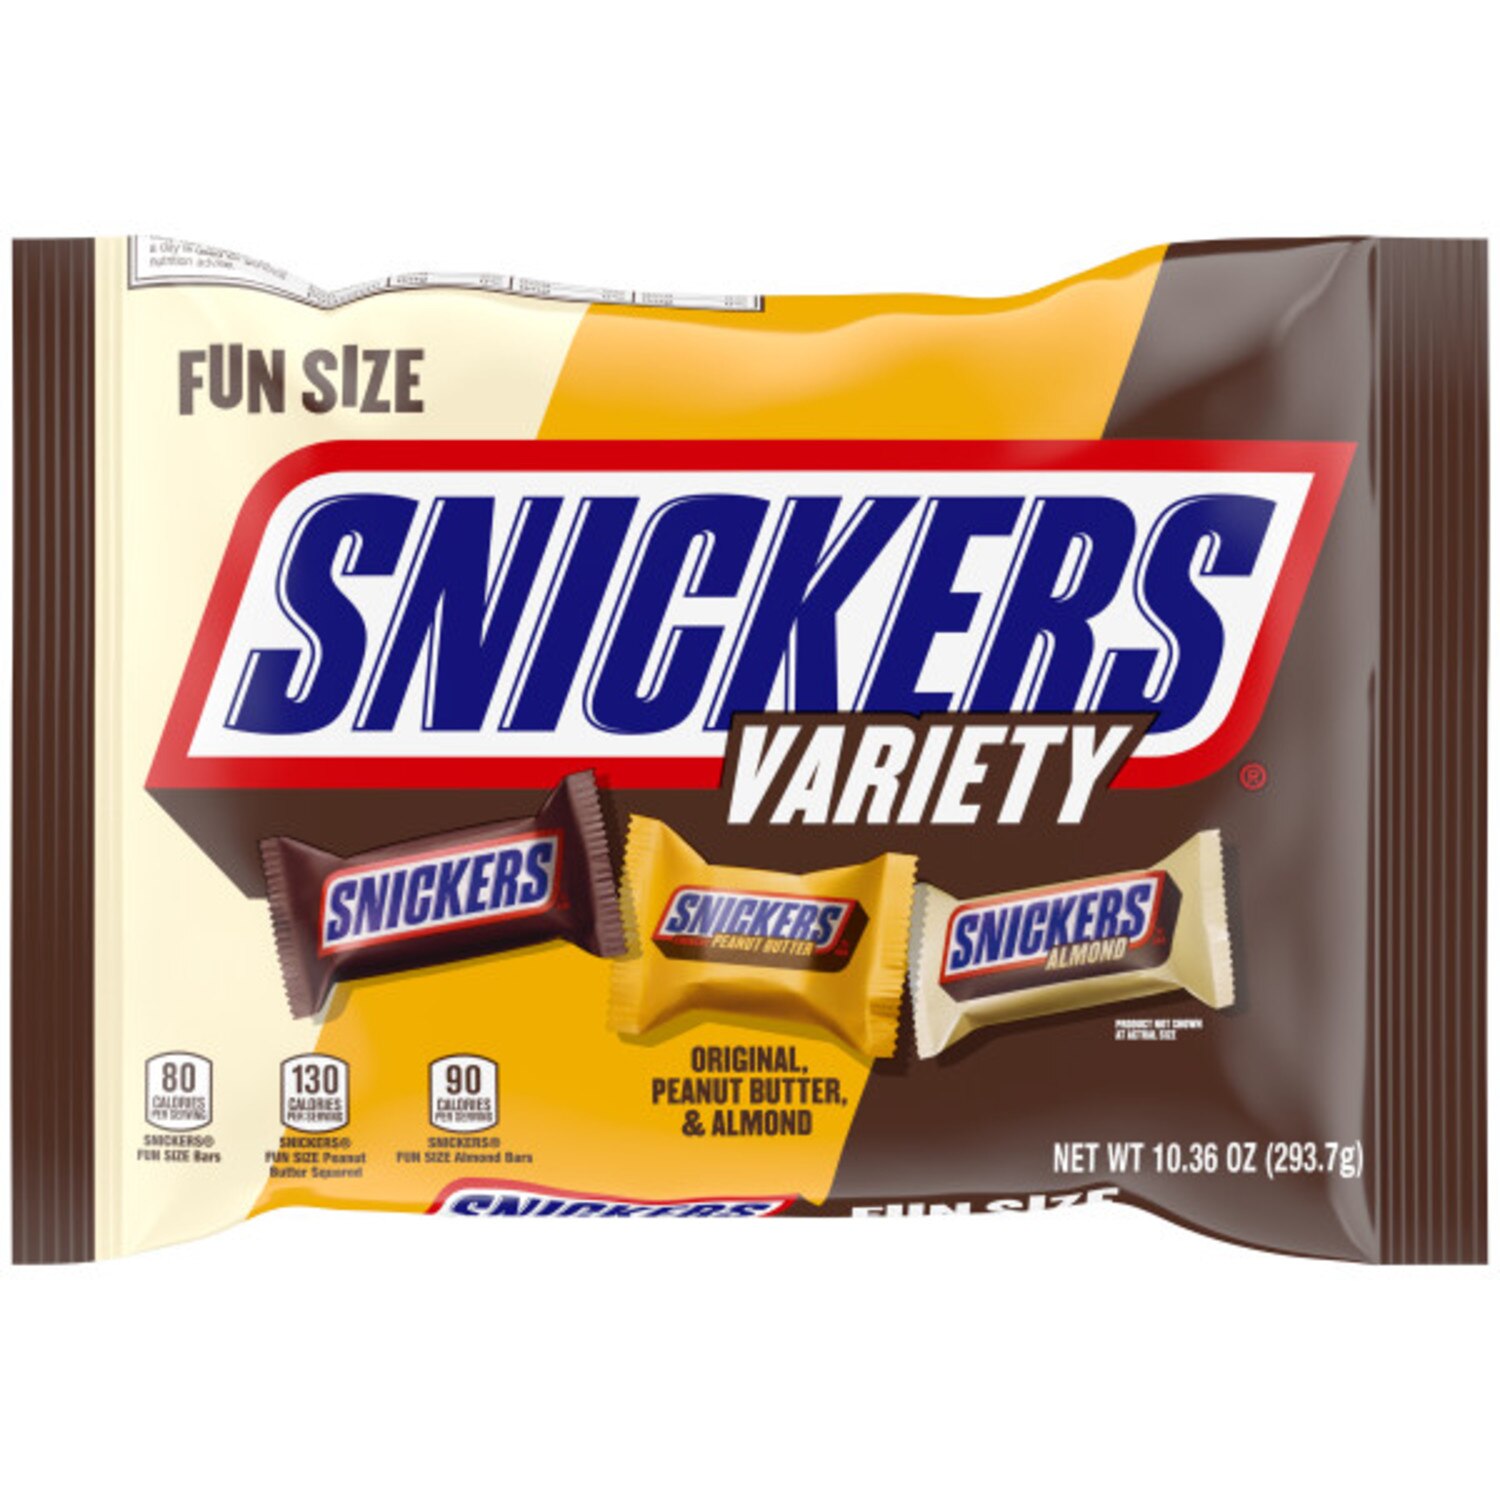 One Hundred Grand Snack Size Candy Bars 10oz Bag